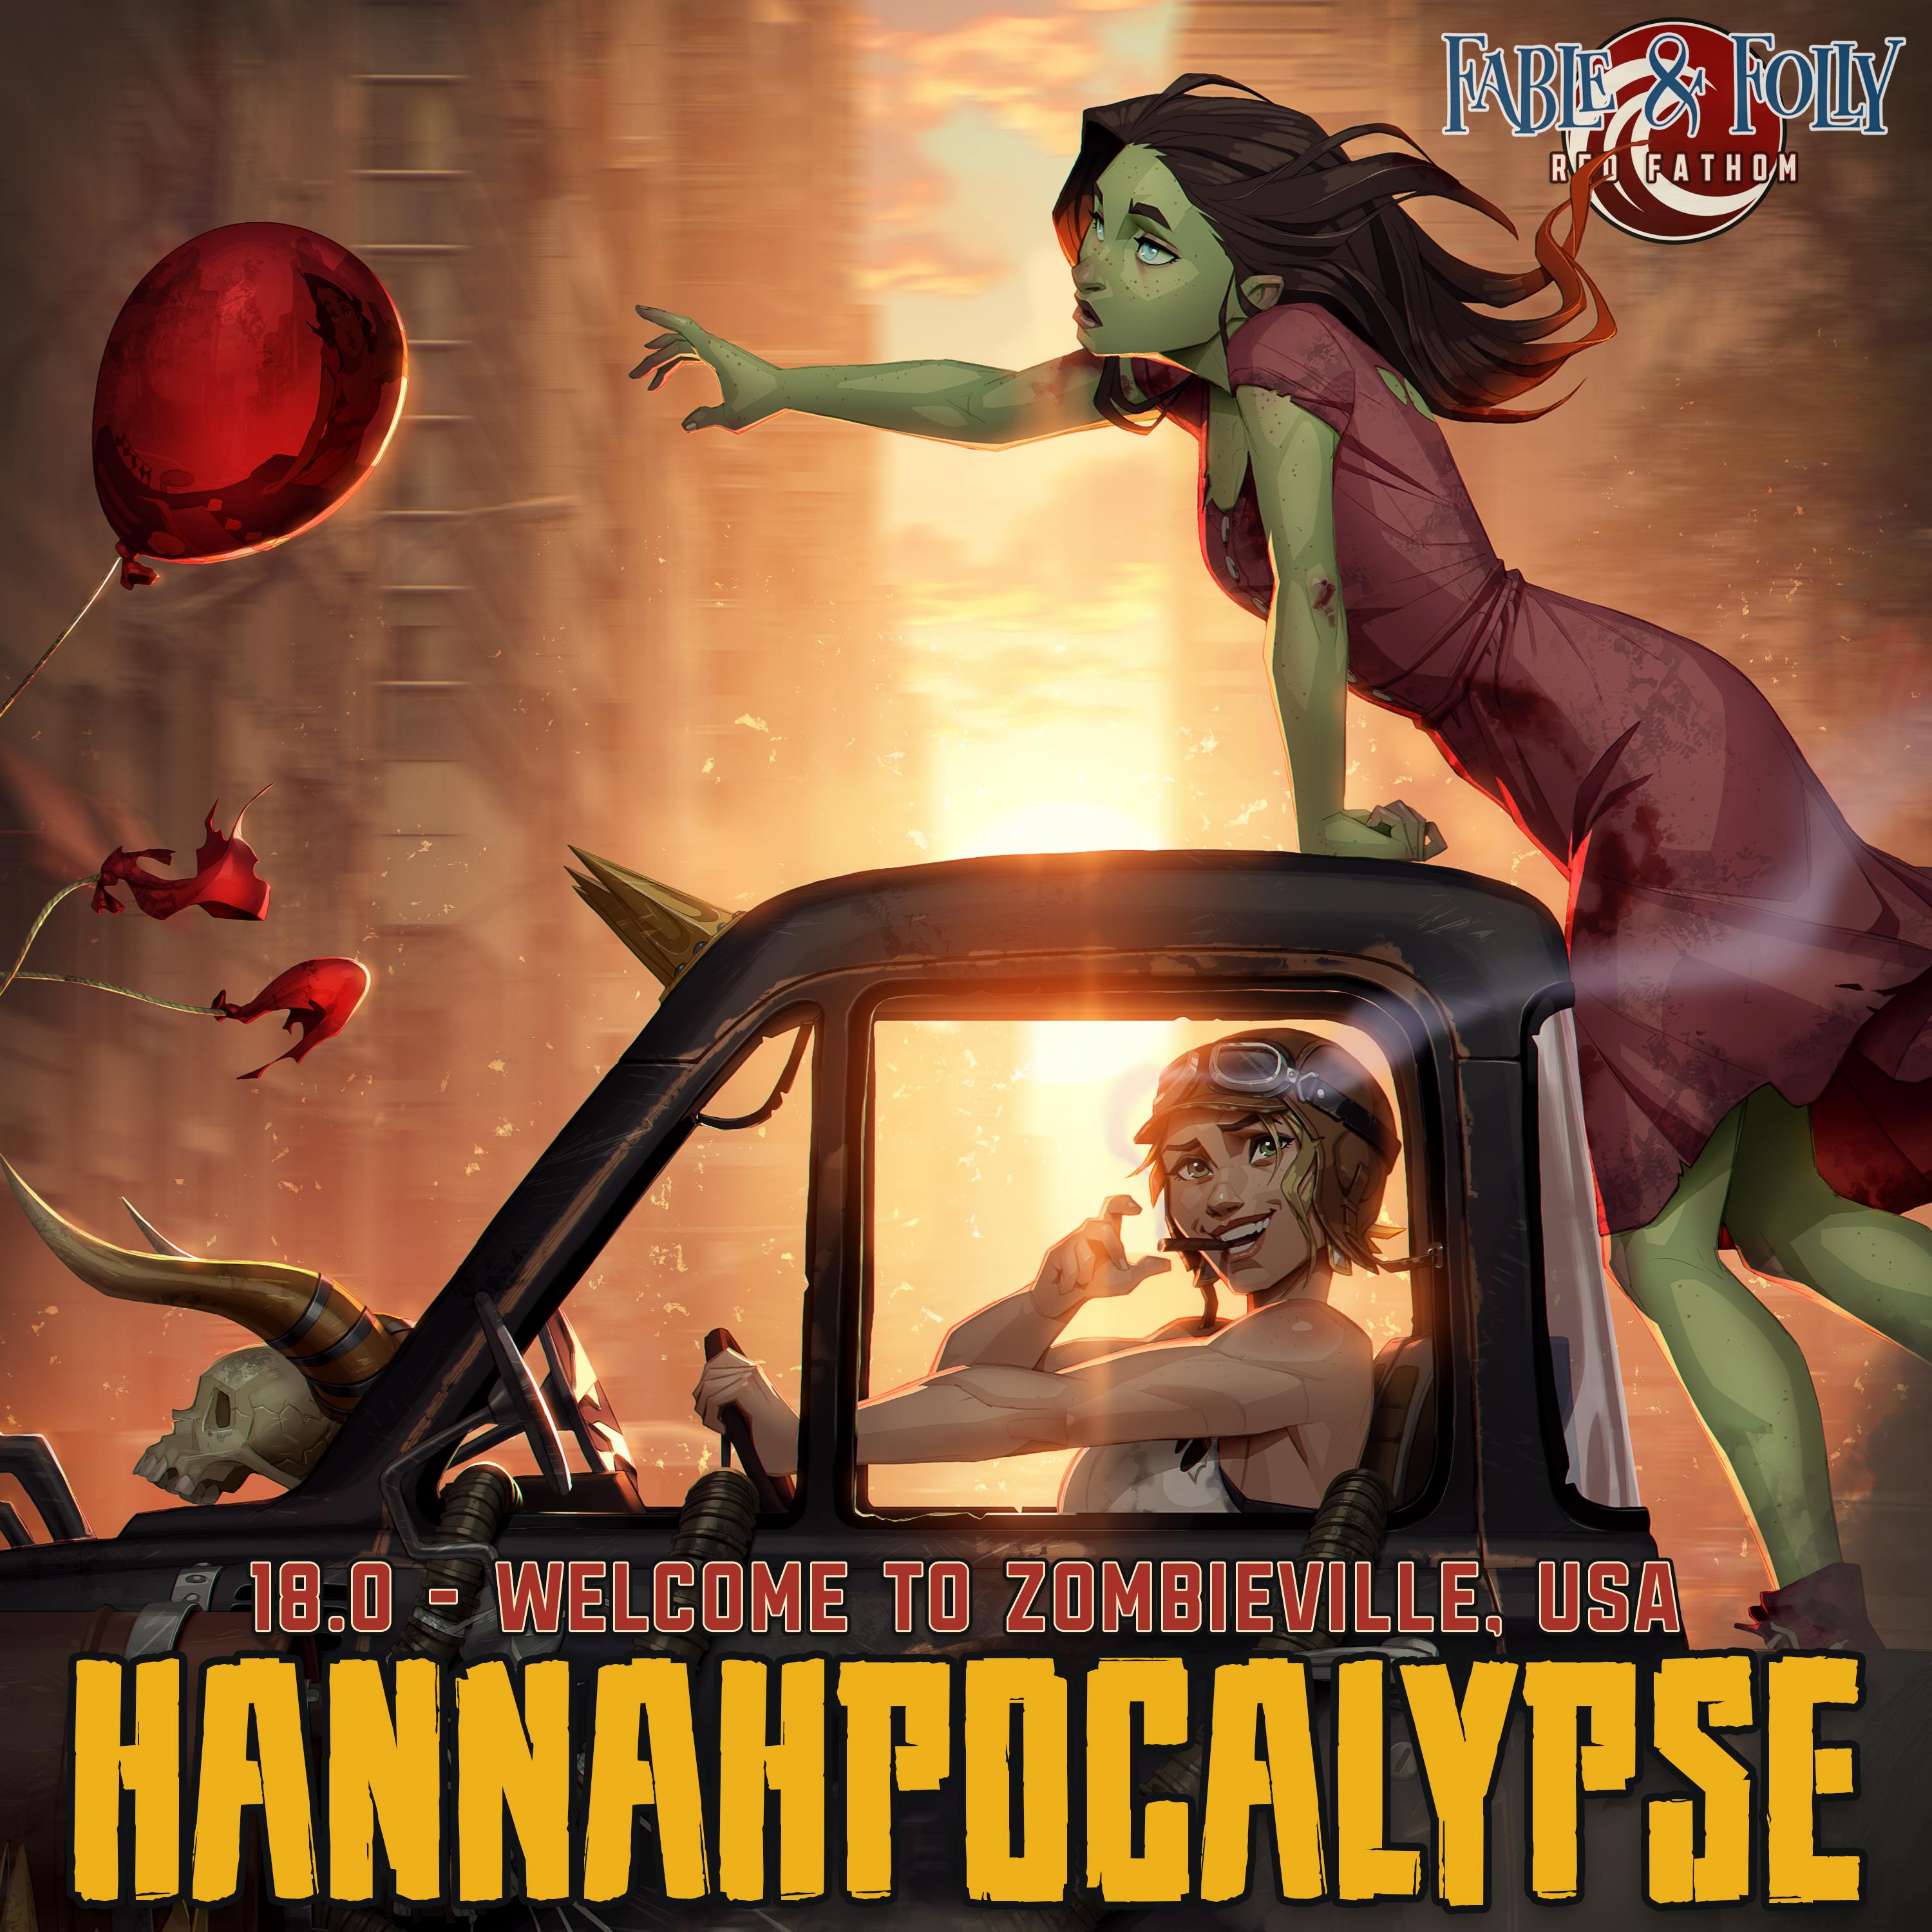 18.0 - Welcome to Zombieville, USA